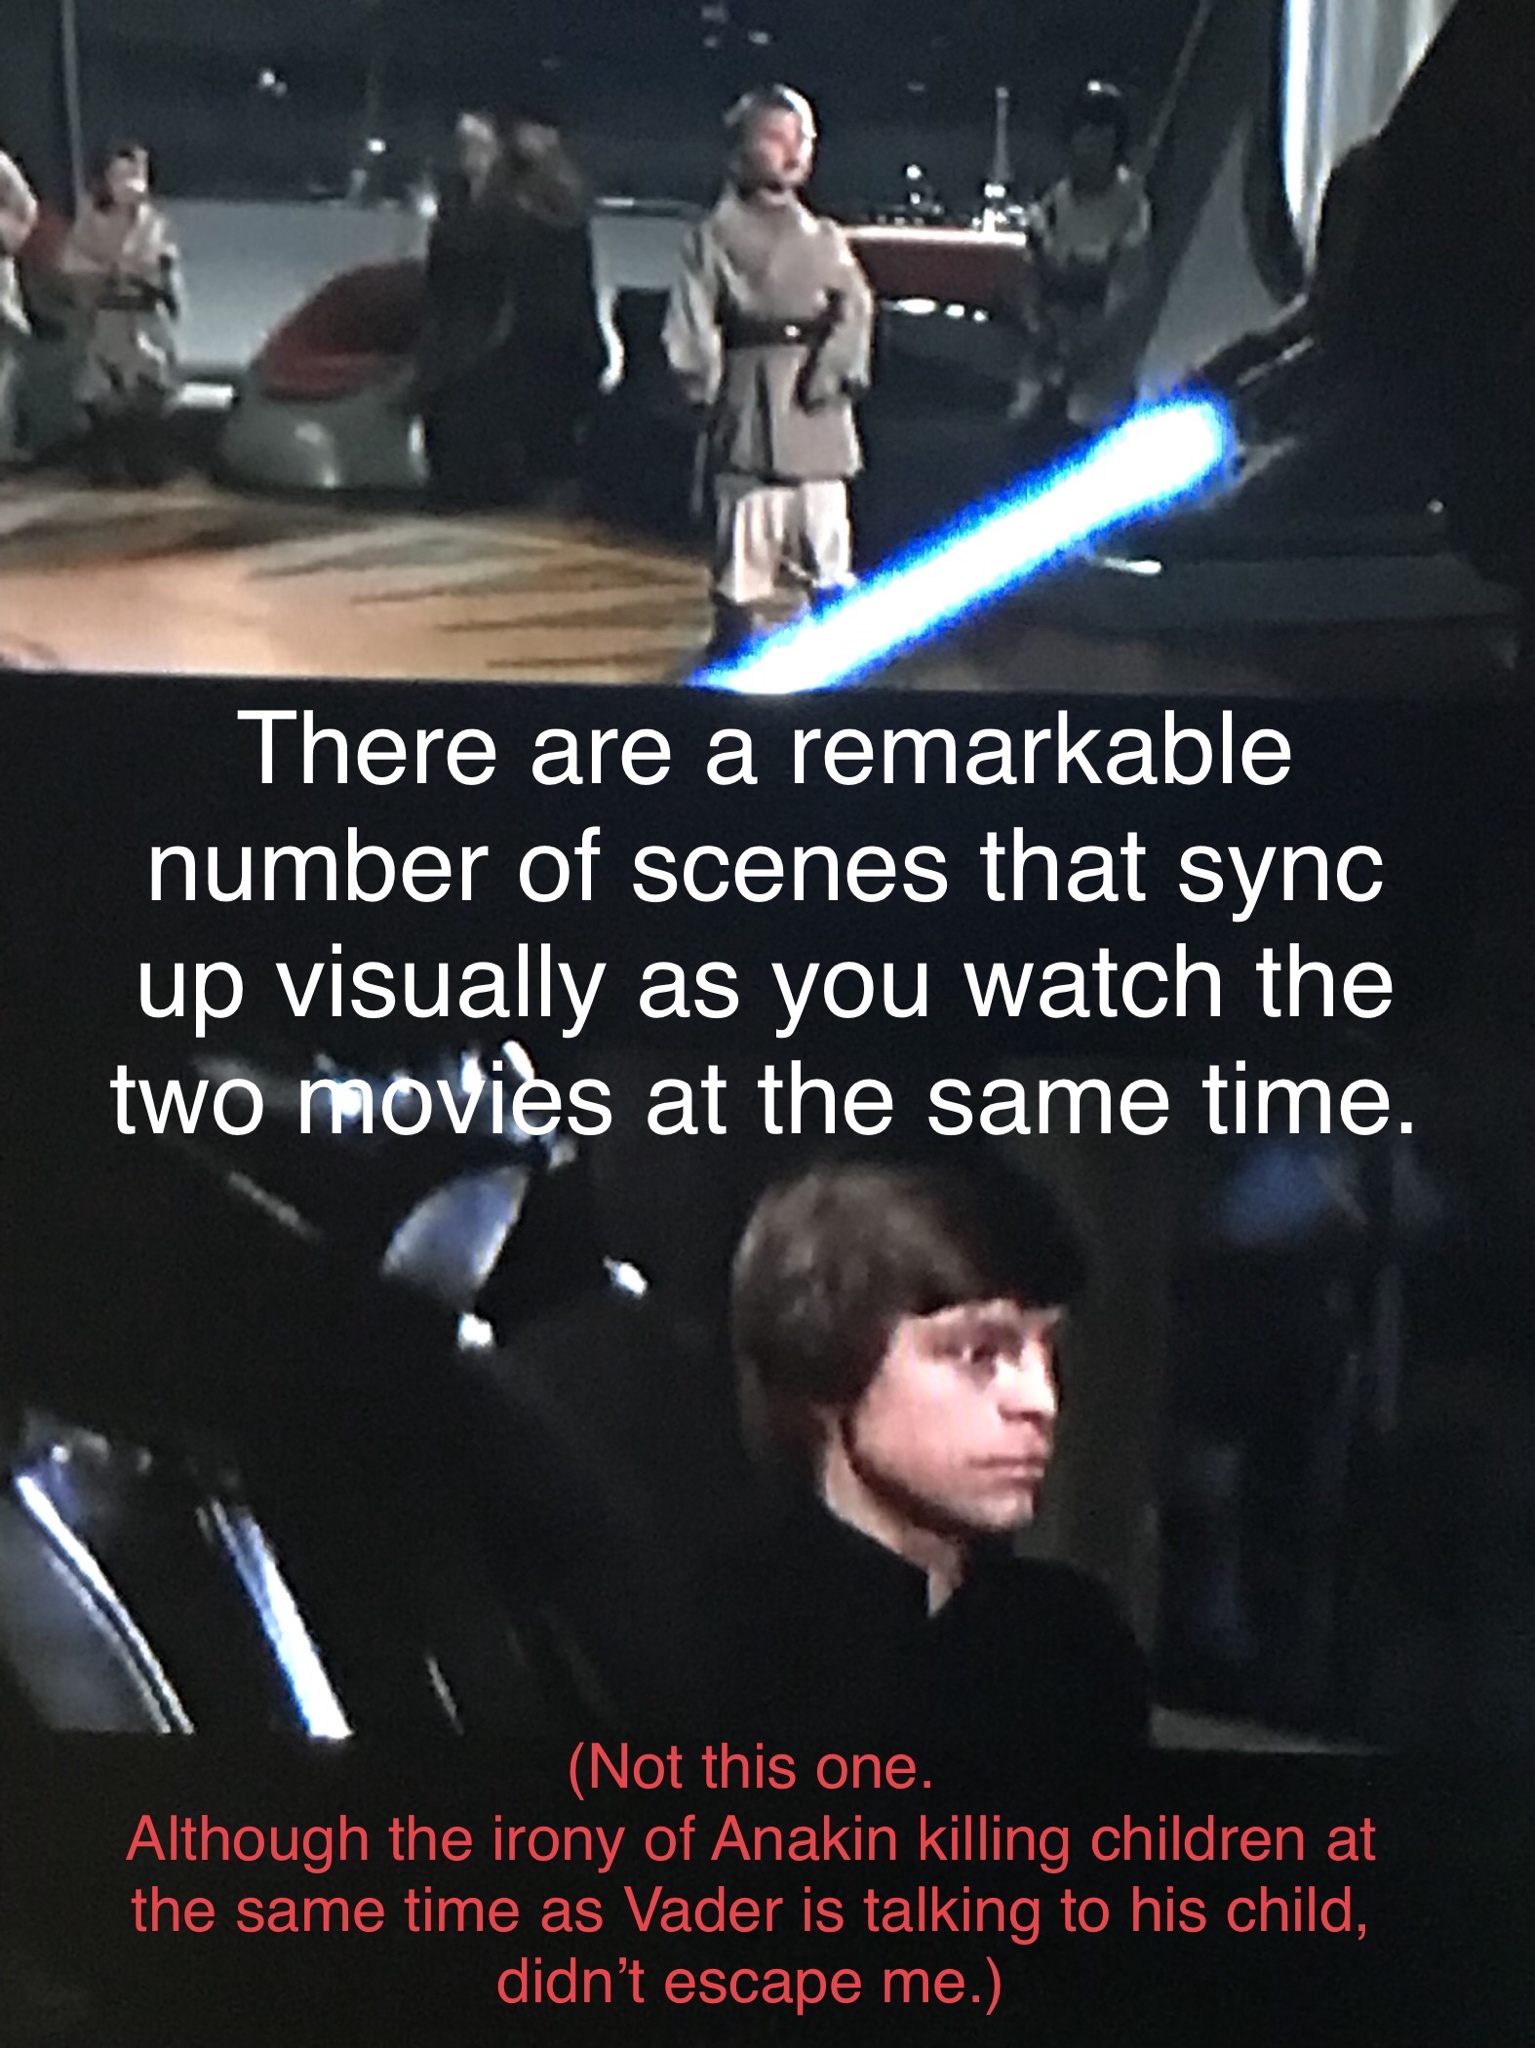 photo caption - There are a remarkable number of scenes that sync up visually as you watch the two movies at the same time. Not this one. Although the irony of Anakin killing children at the same time as Vader is talking to his child, didn't escape me.